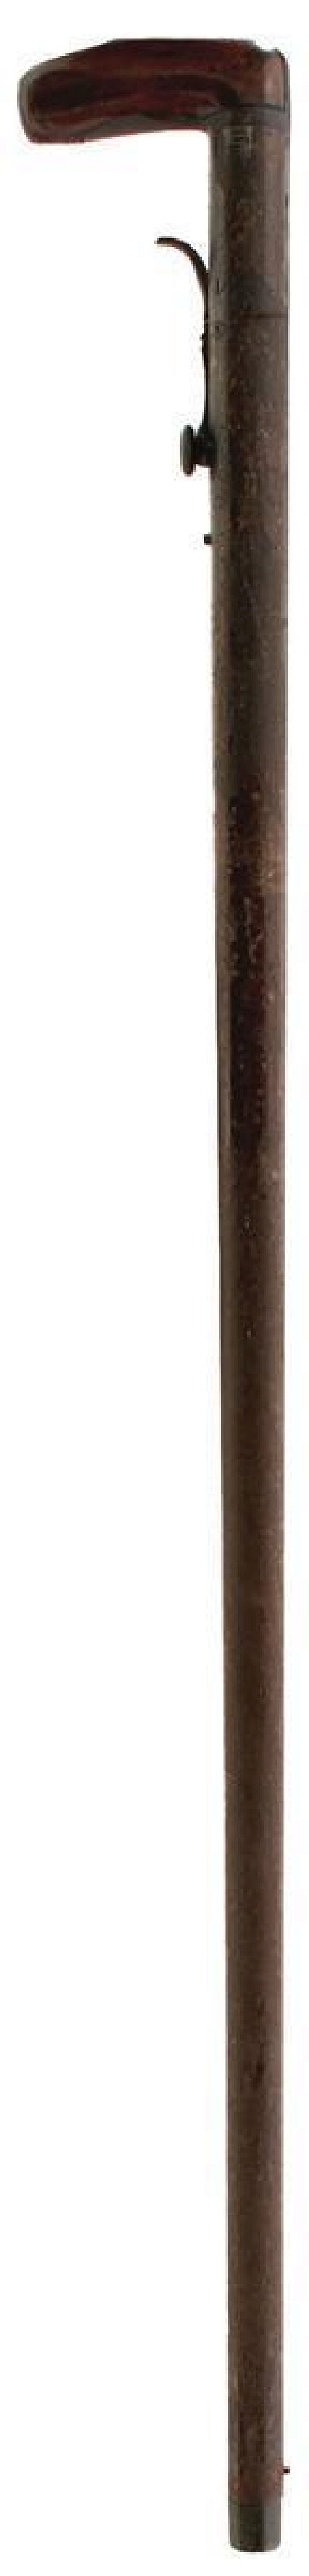 A 16-BORE PERCUSSION WALKING STICK SHOTGUN, 28.5inch sighted barrel, underhammer action, exposed